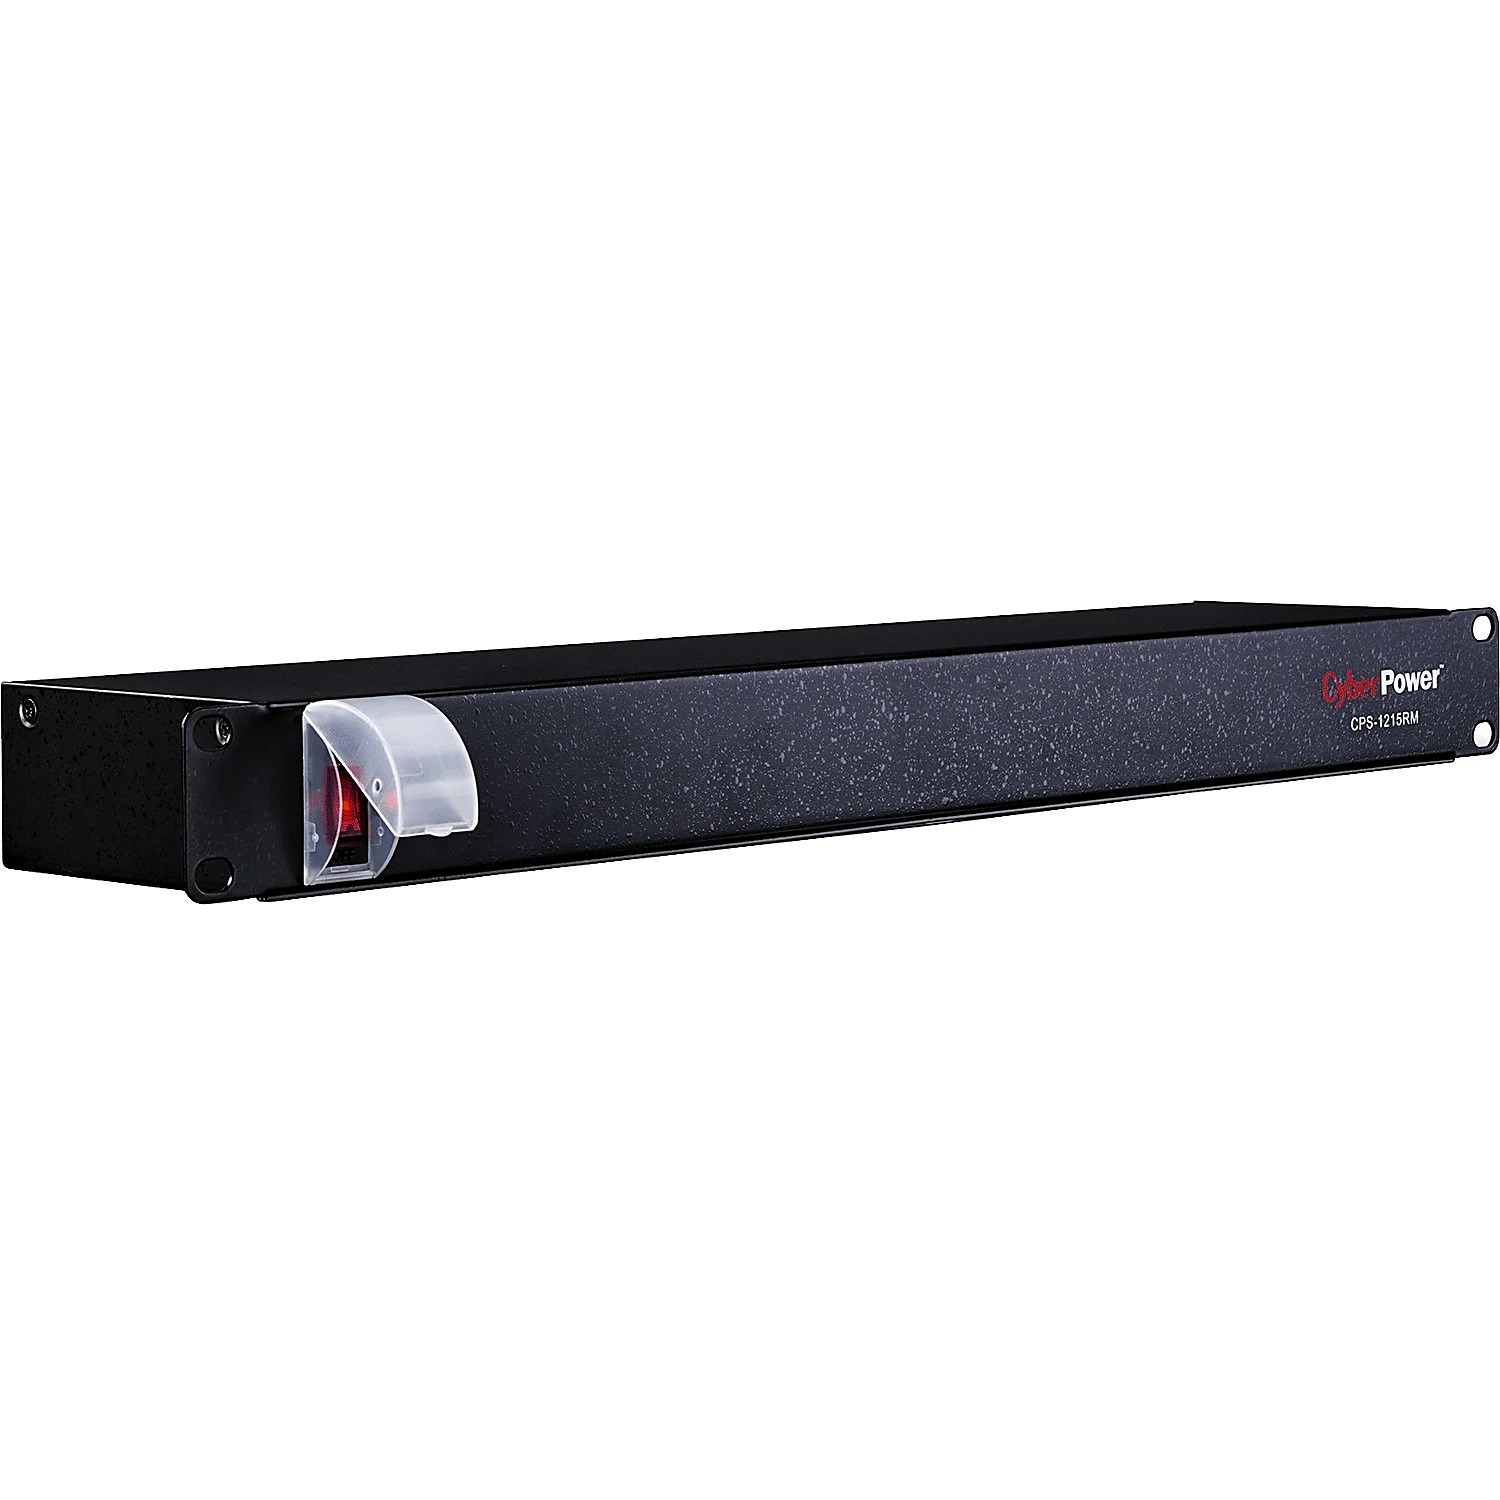 CyberPower CPS1215RM Basic PDU, 100-125V/15A, 10 Outlets, 15ft Power Cord, 1U